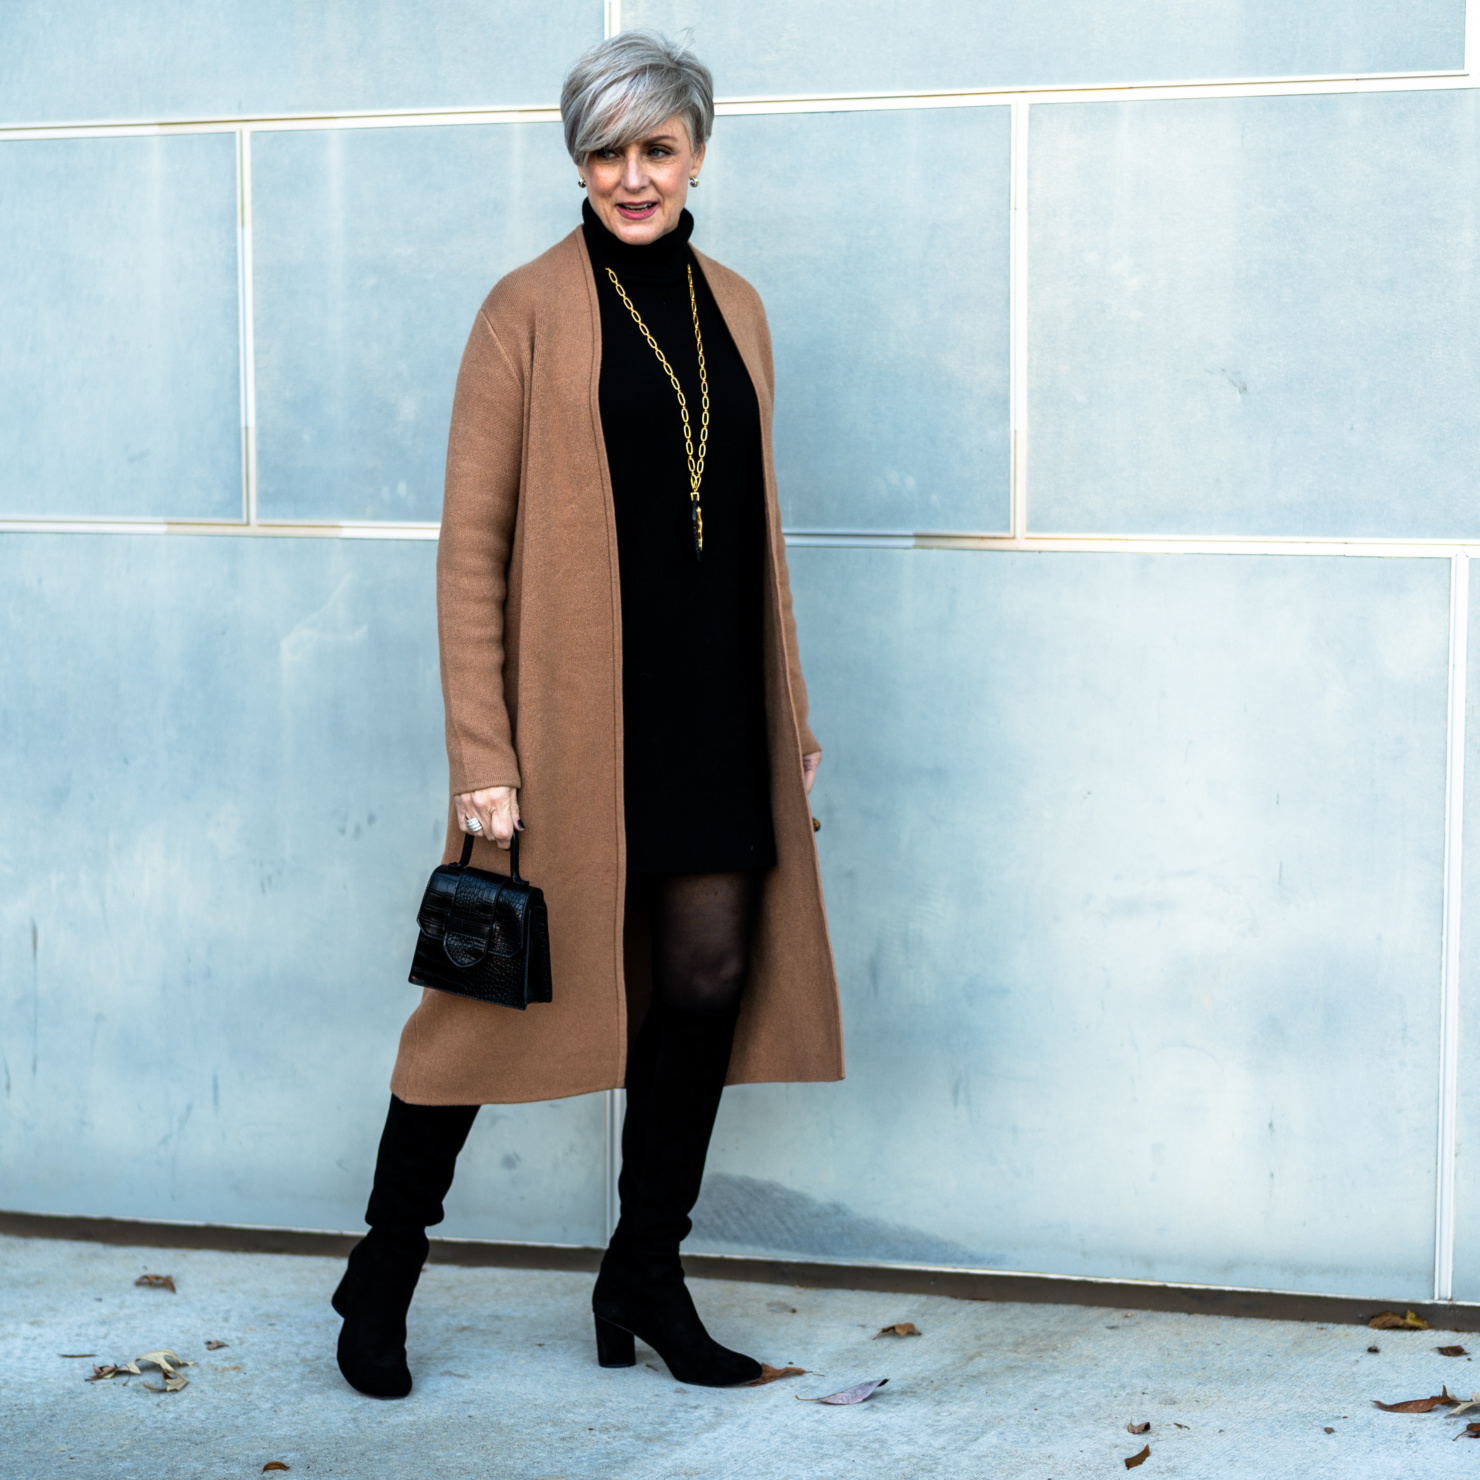 cashmere, cardigans and boots